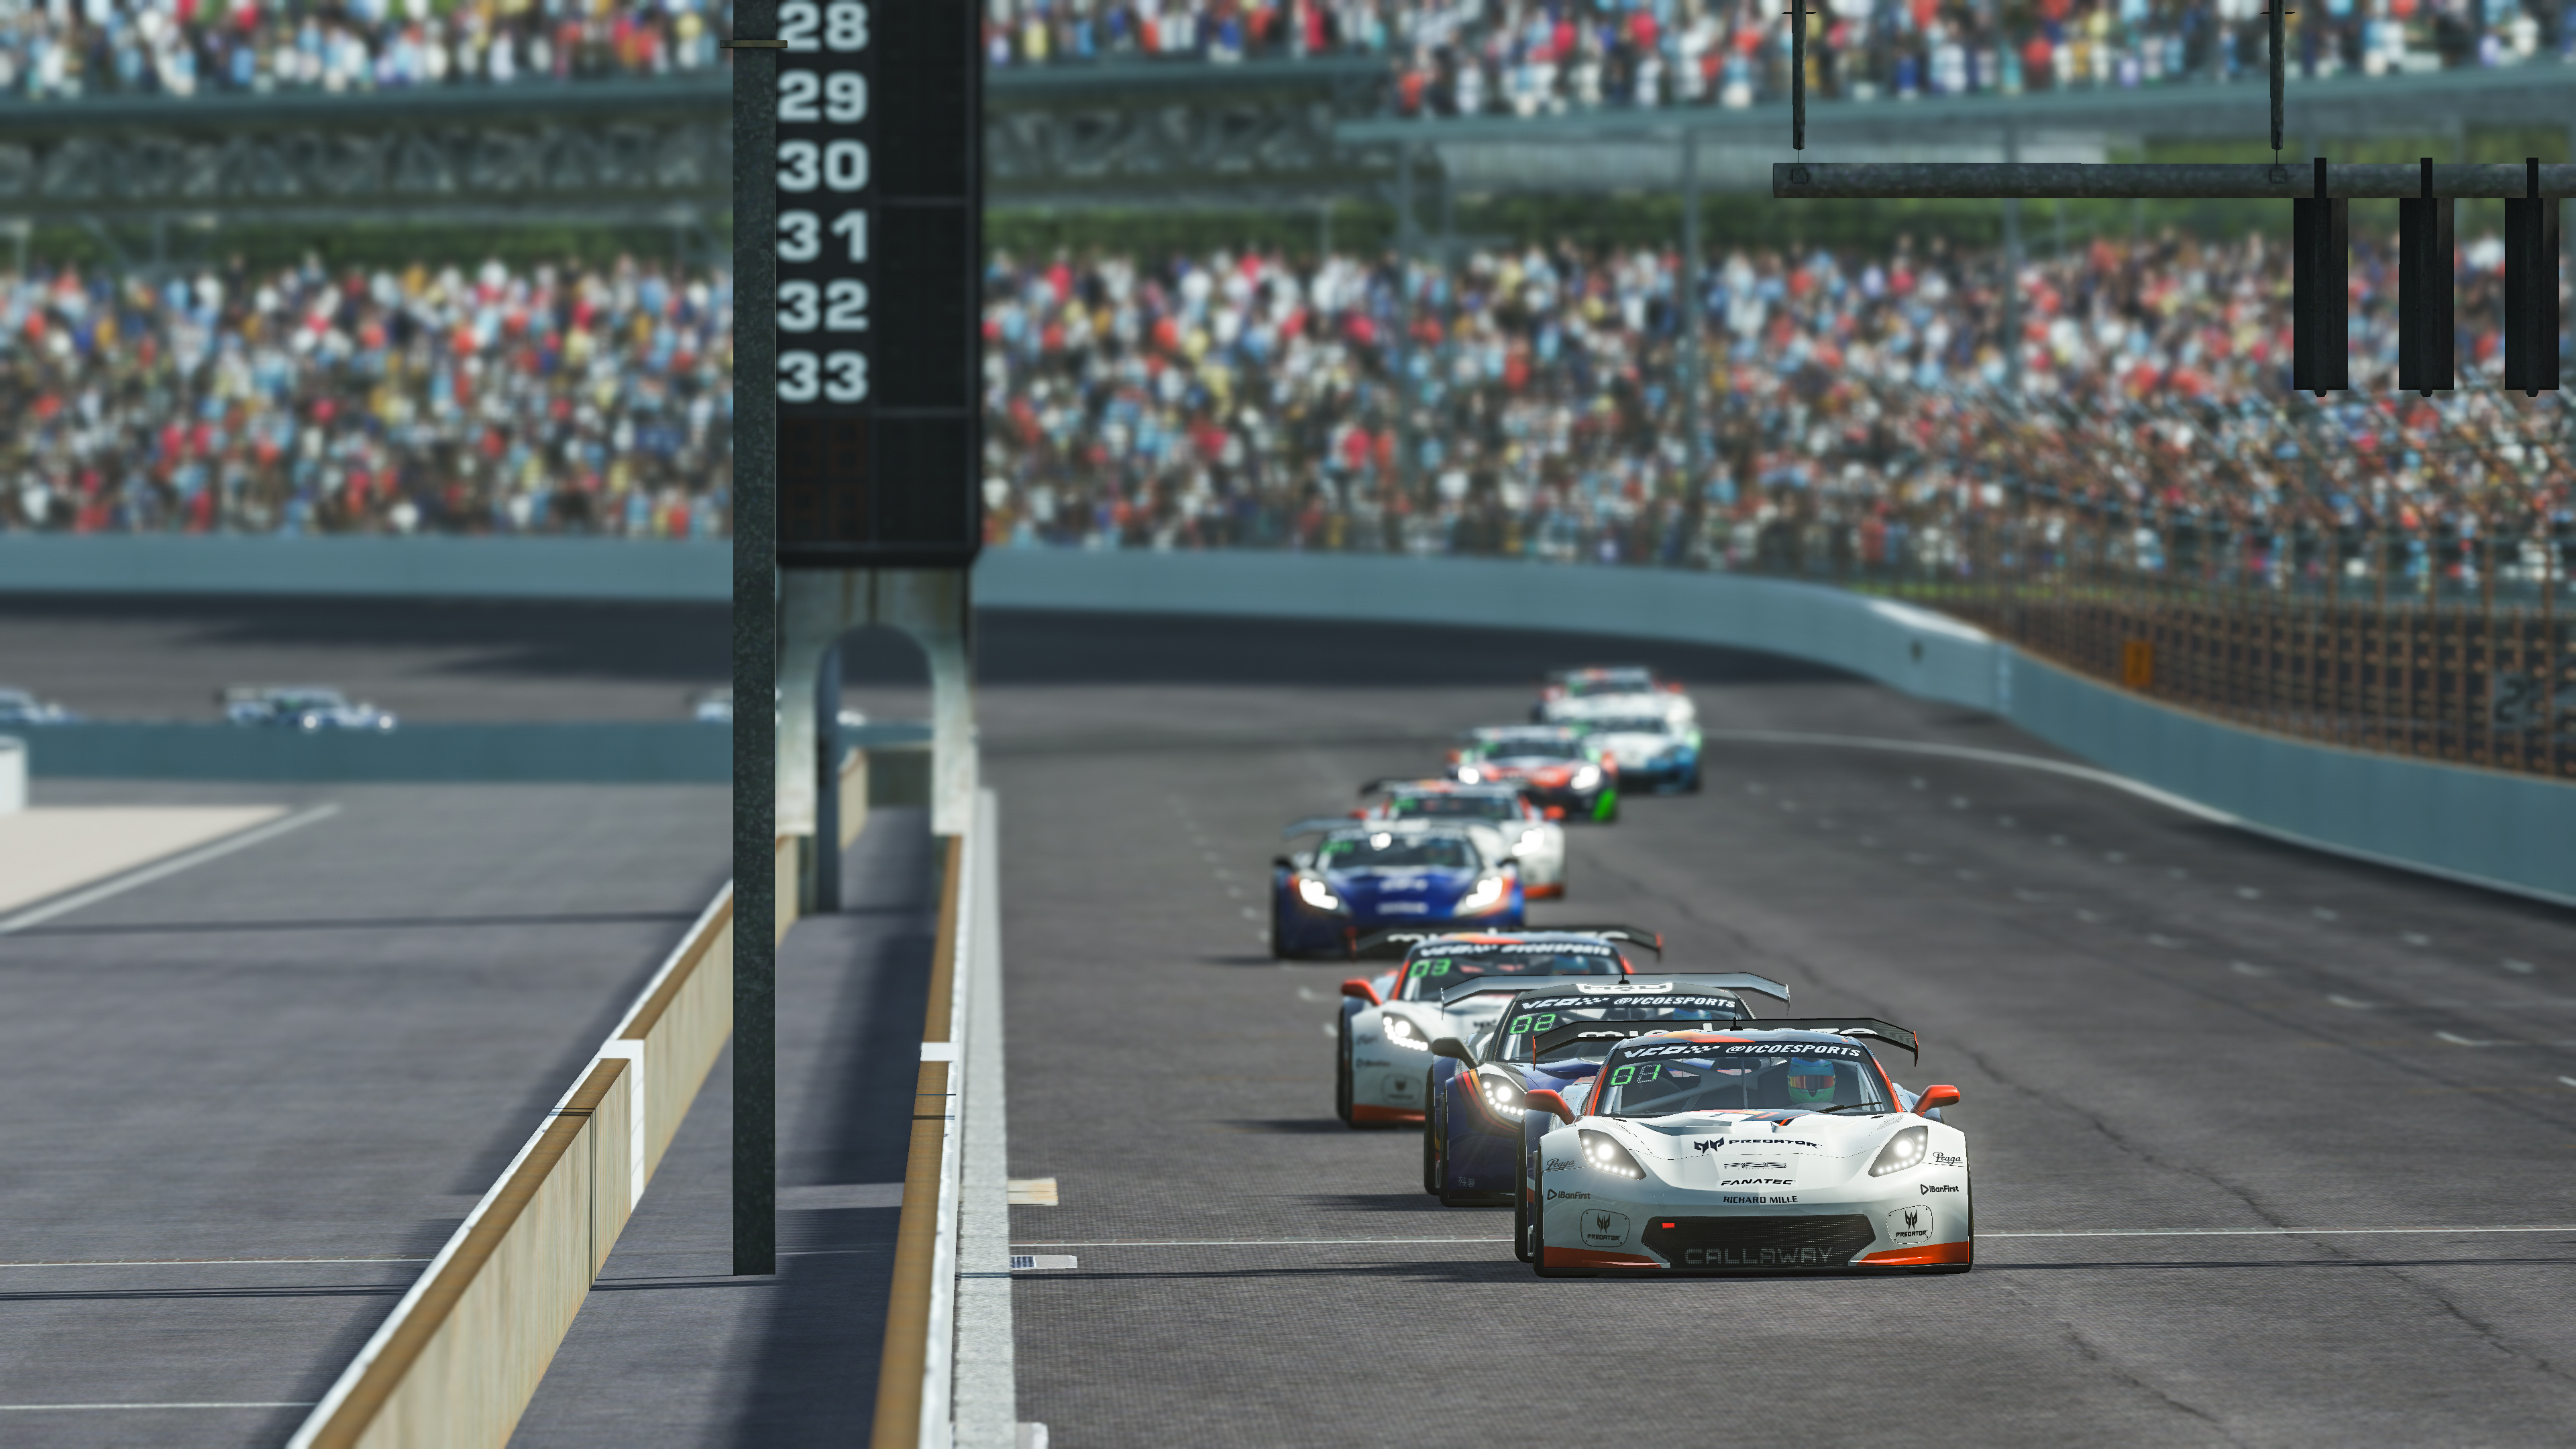 Indianapolis Motor Speedway, Win indy races, Virtual competition, GT pro series, 3840x2160 4K Desktop